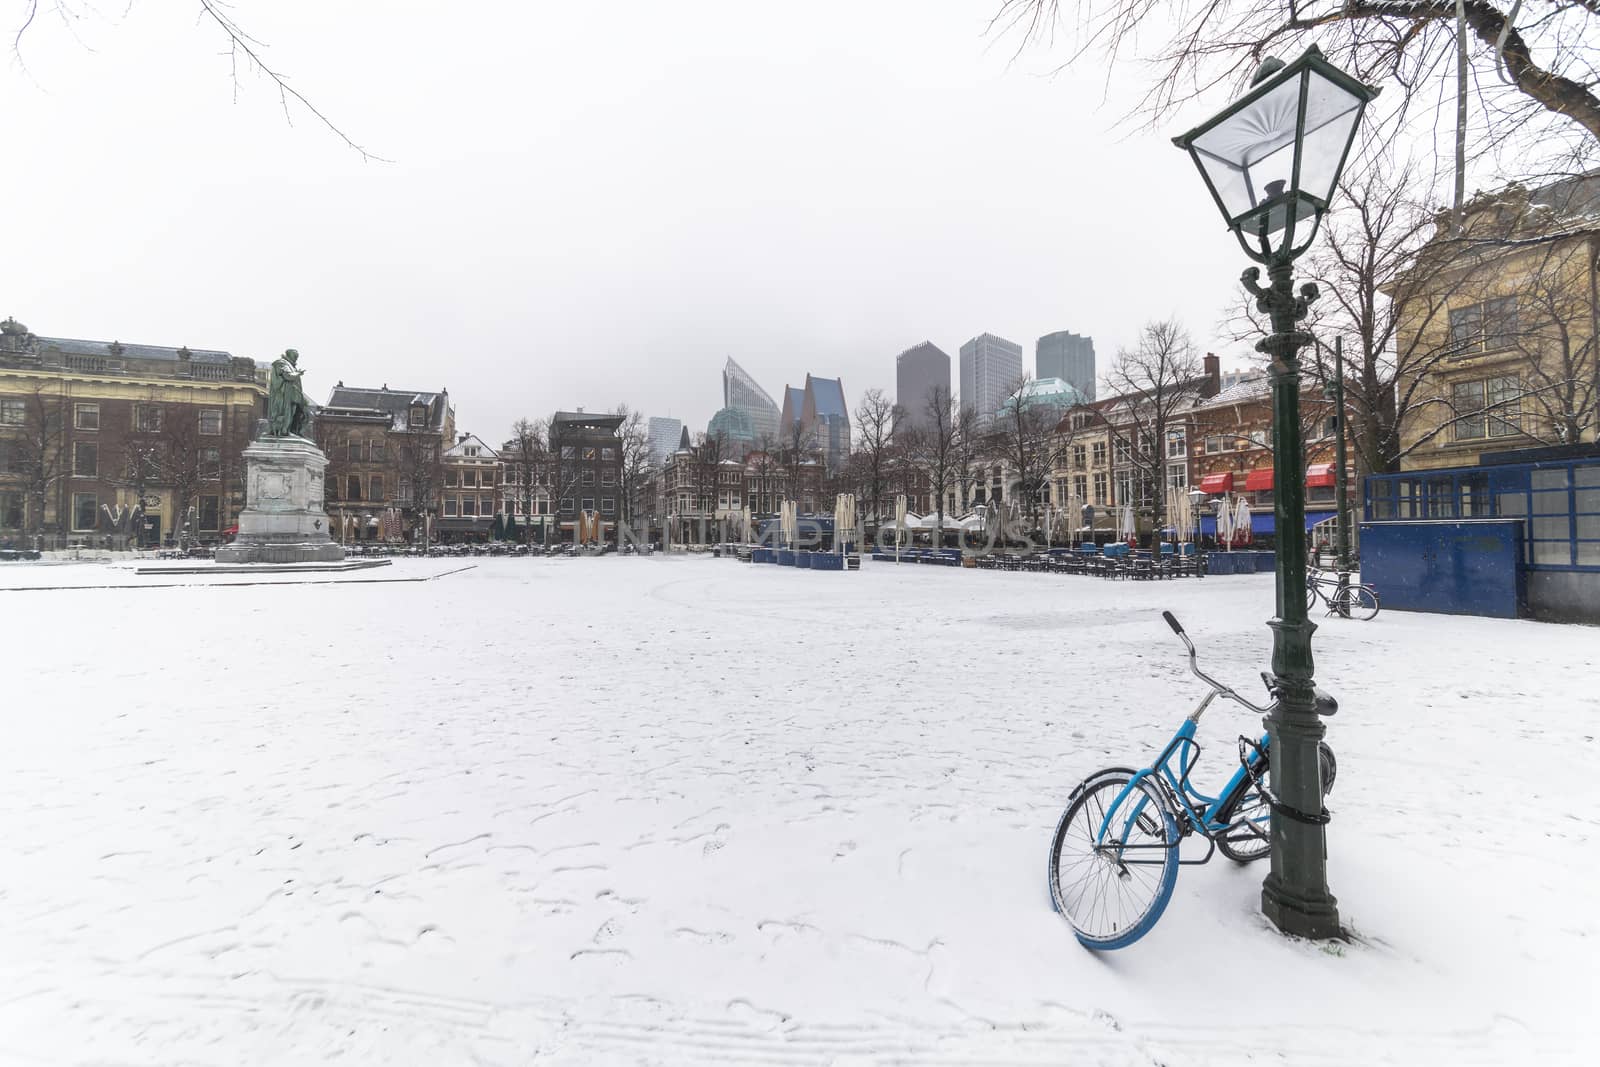 Bicycle locked with the lamp post at the central place covered by snow, Plein (Dutch), usually crowded with people getting diner and drink during the sunset and warm weather in The Hague, Netherlands by ankorlight